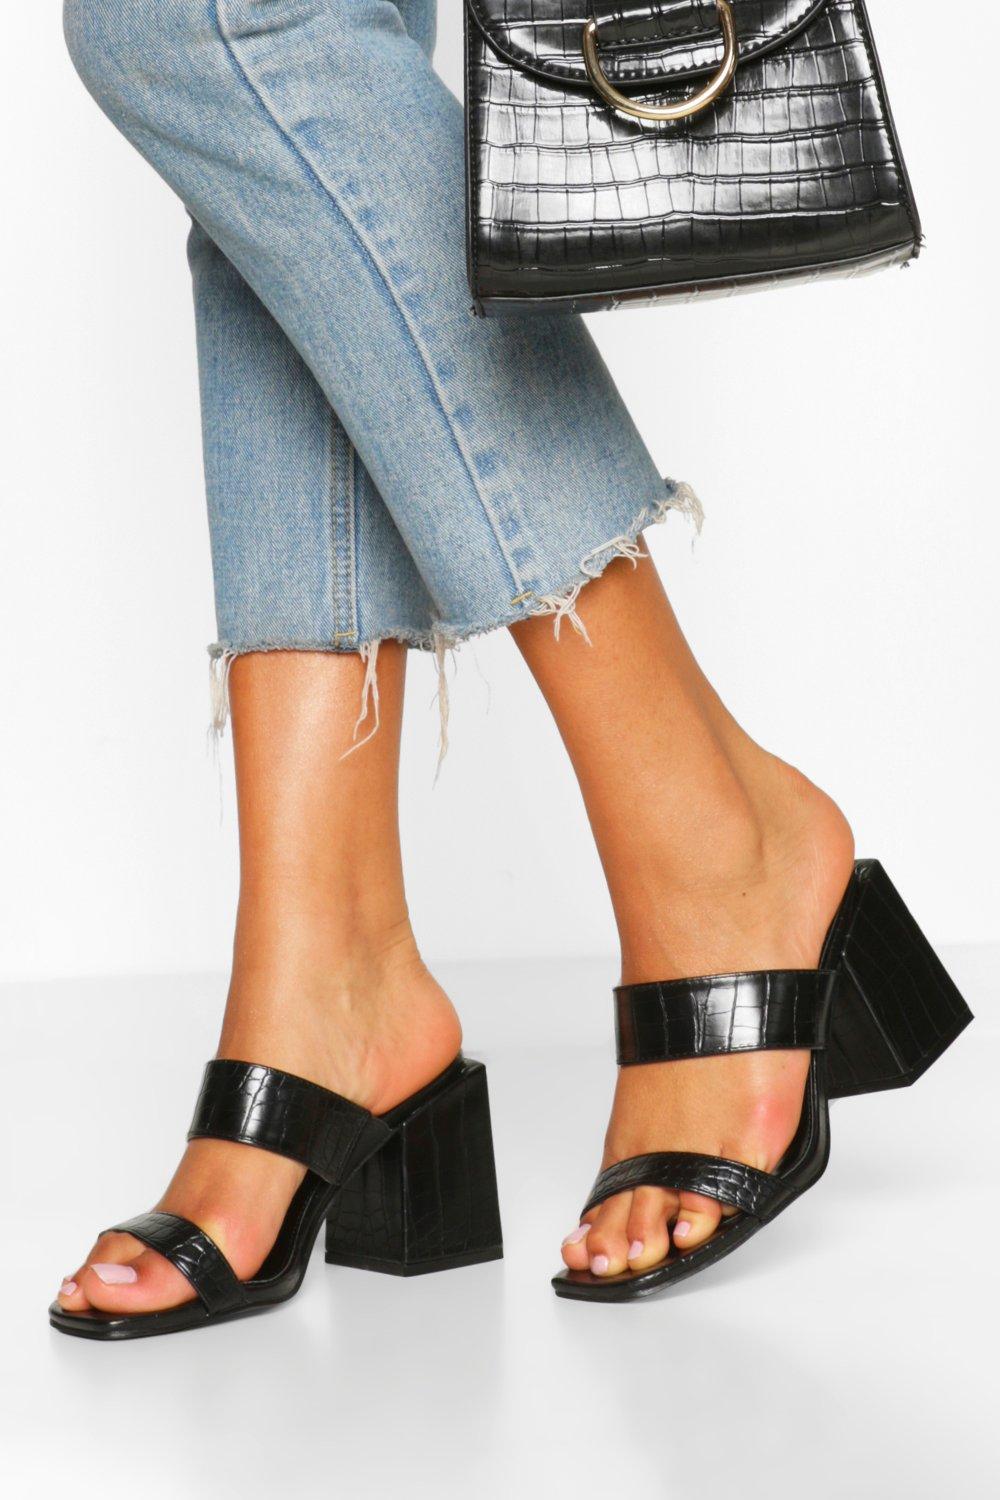 boohoo wide fit shoes